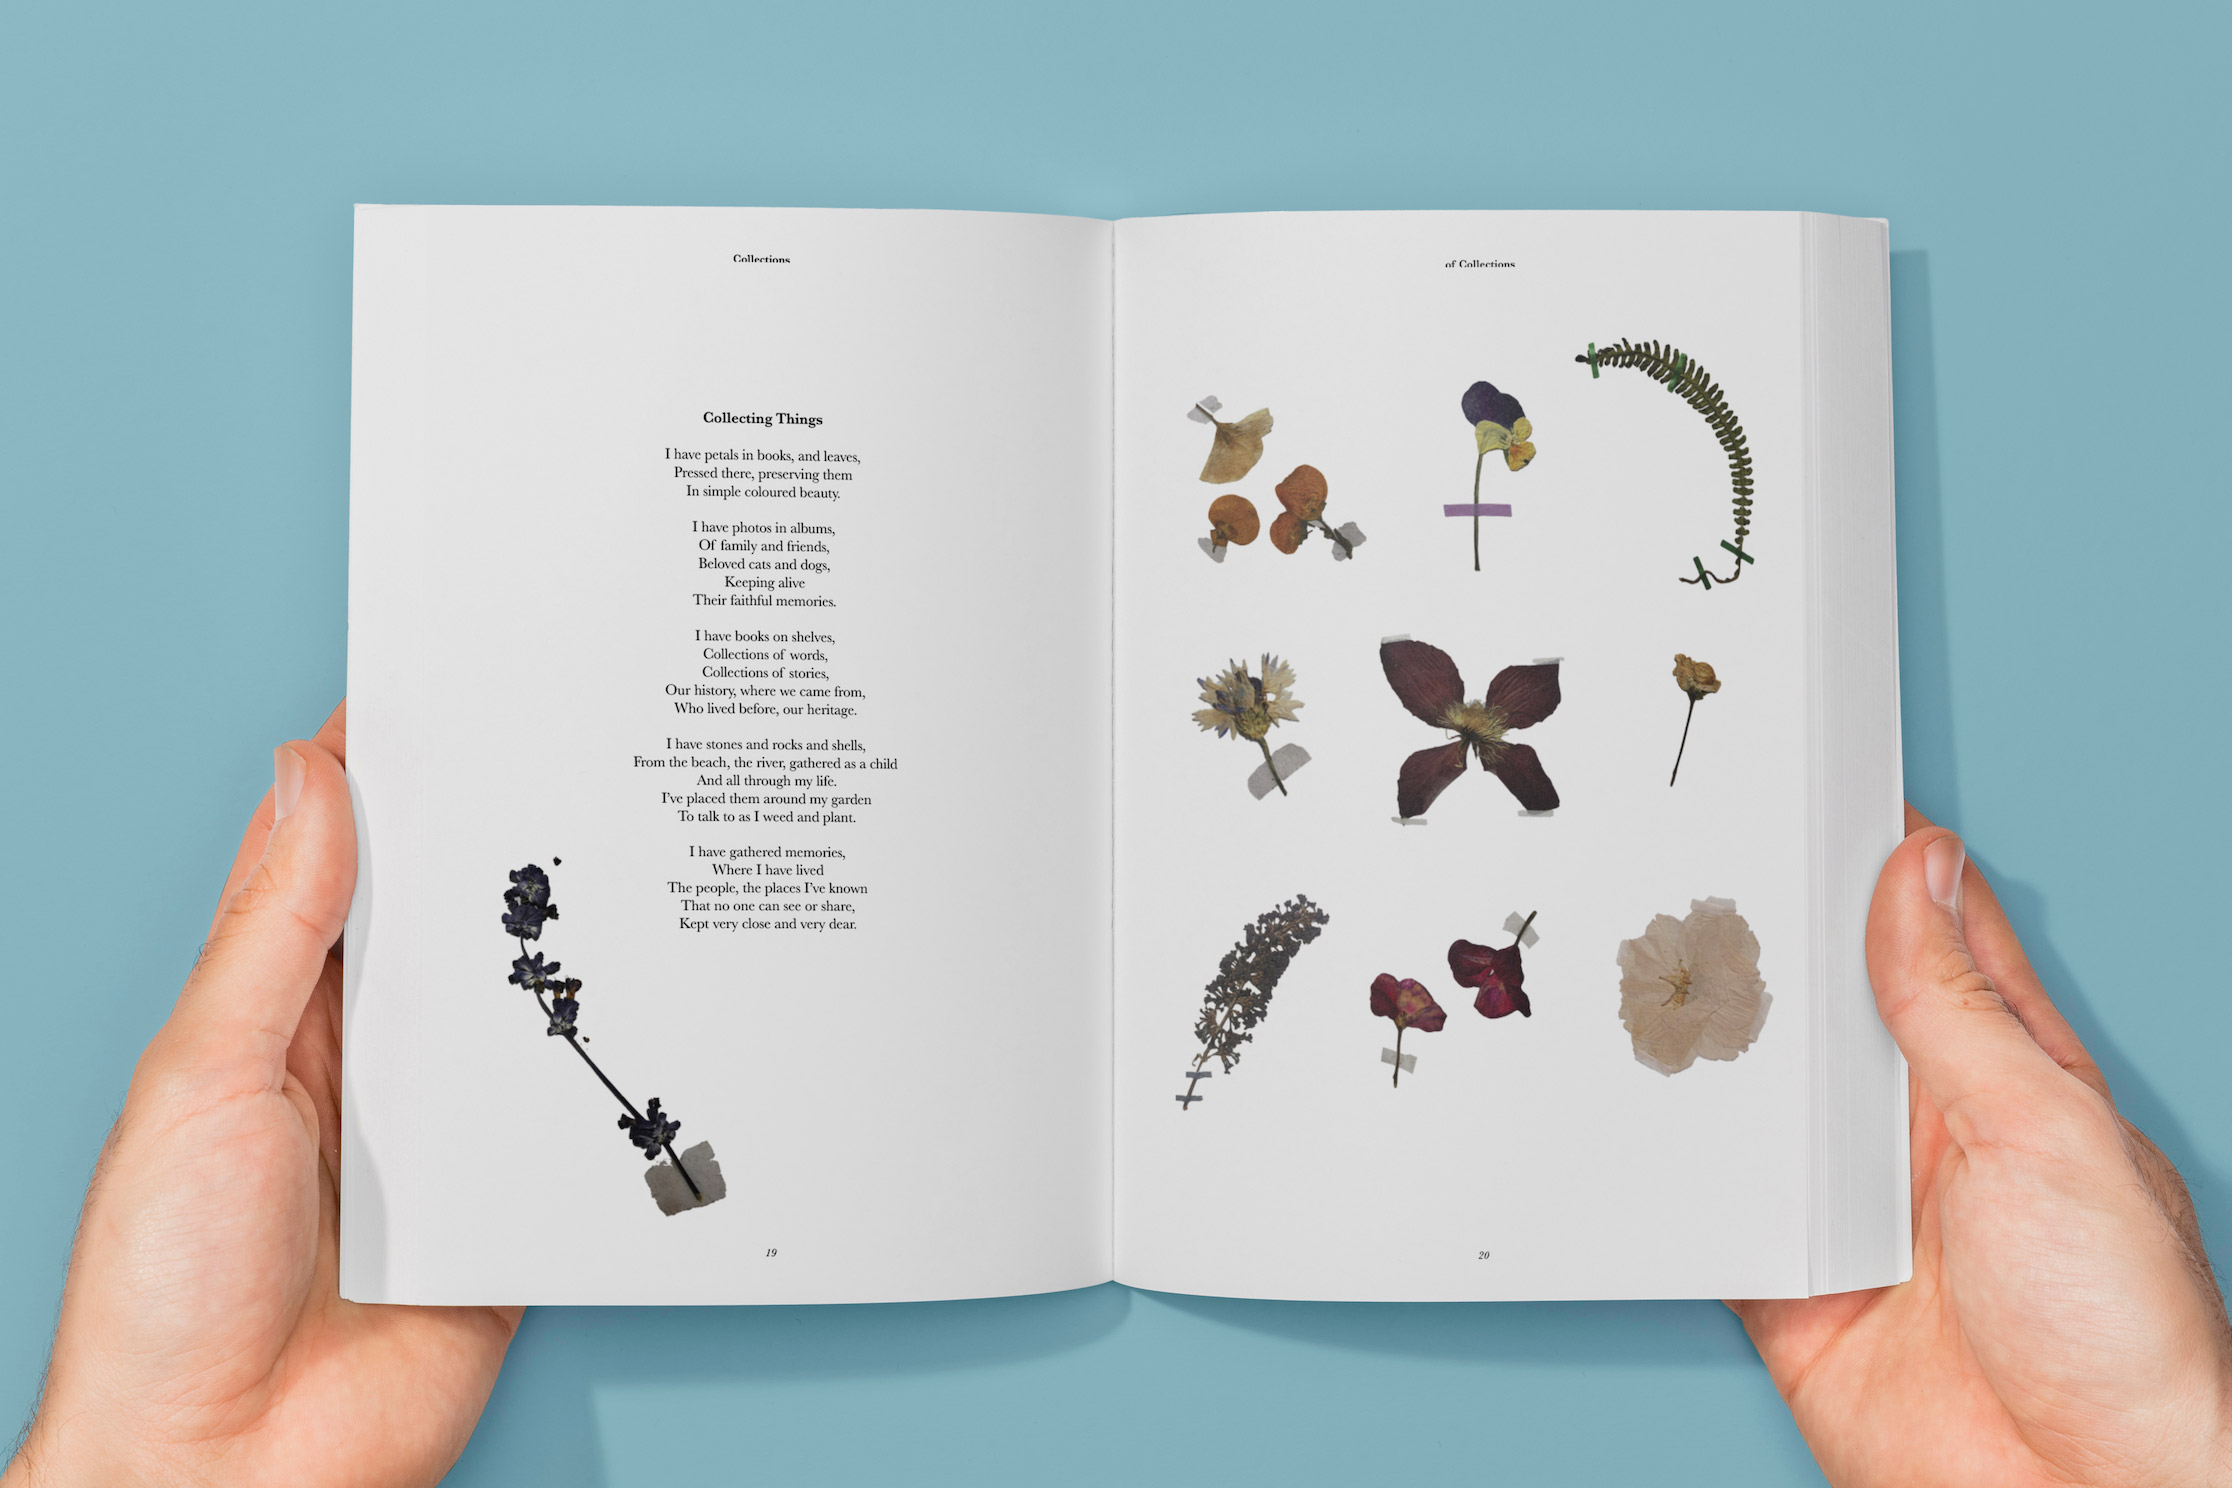 Mock-up print publication spreads featuring a poem about collecting